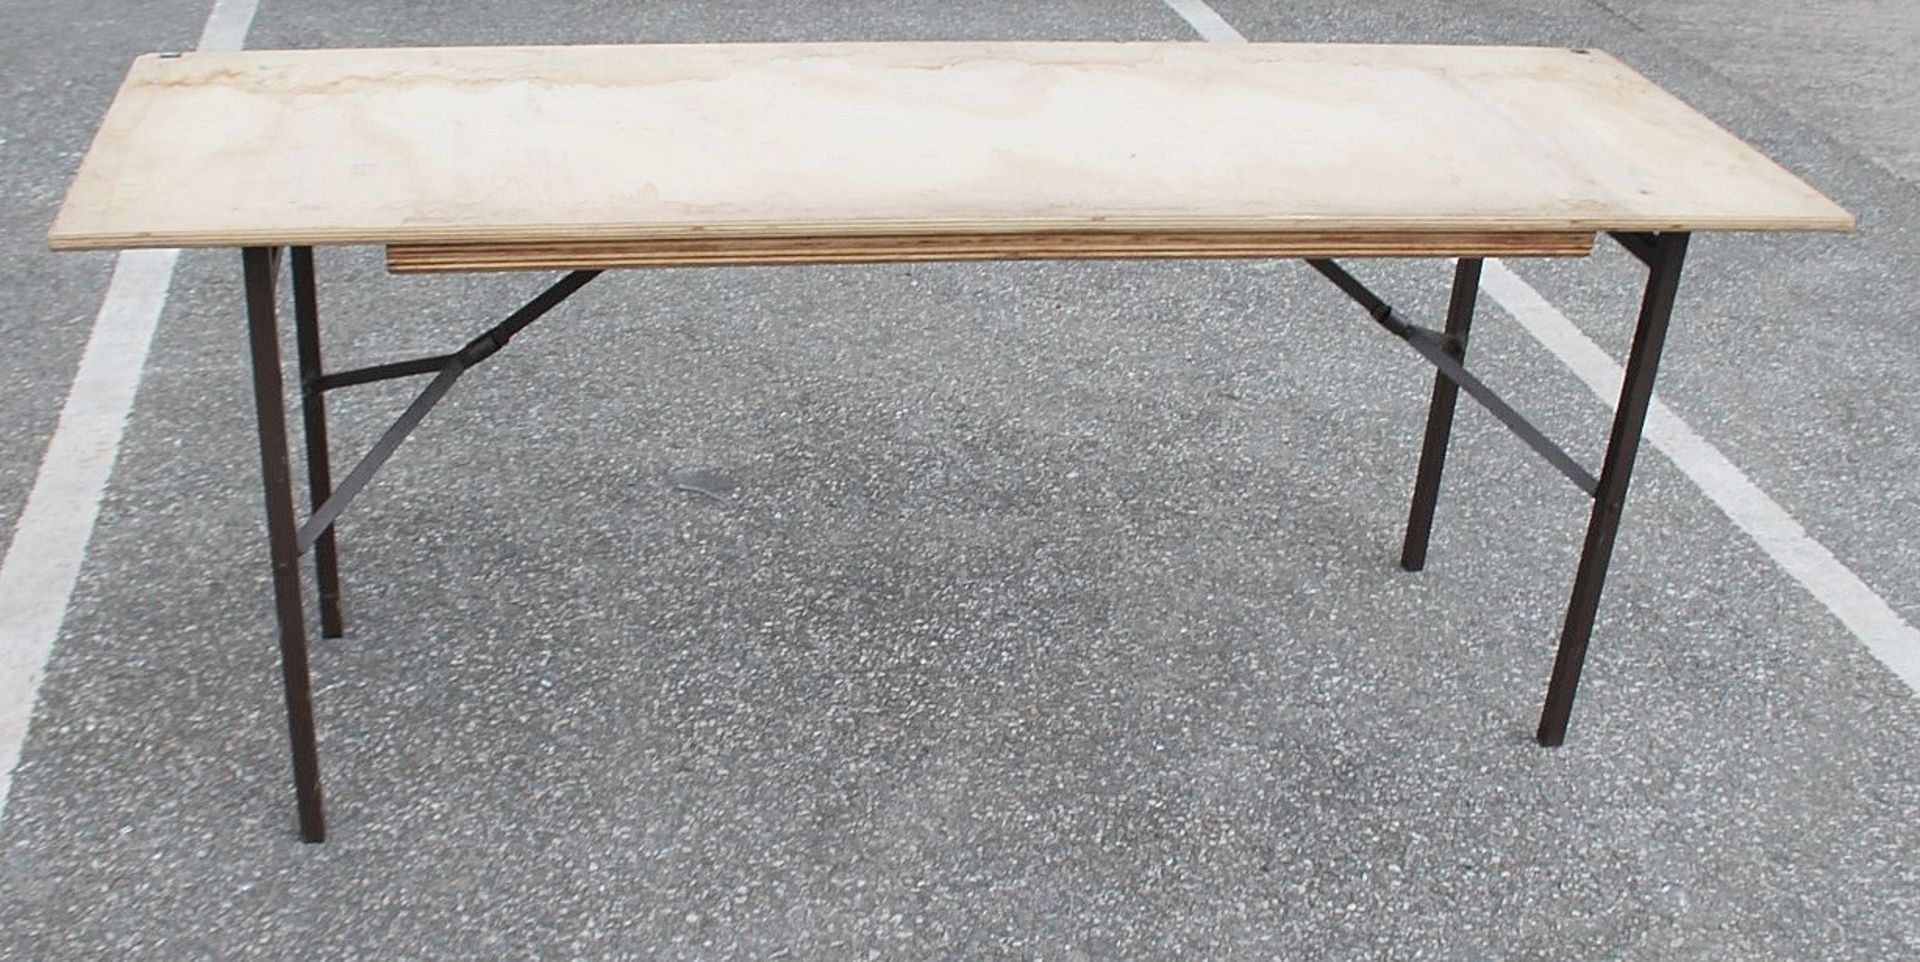 1 x Folding 6ft Wooden Topped Rectangular Trestle Table - Recently Removed From A Well-known - Image 6 of 6